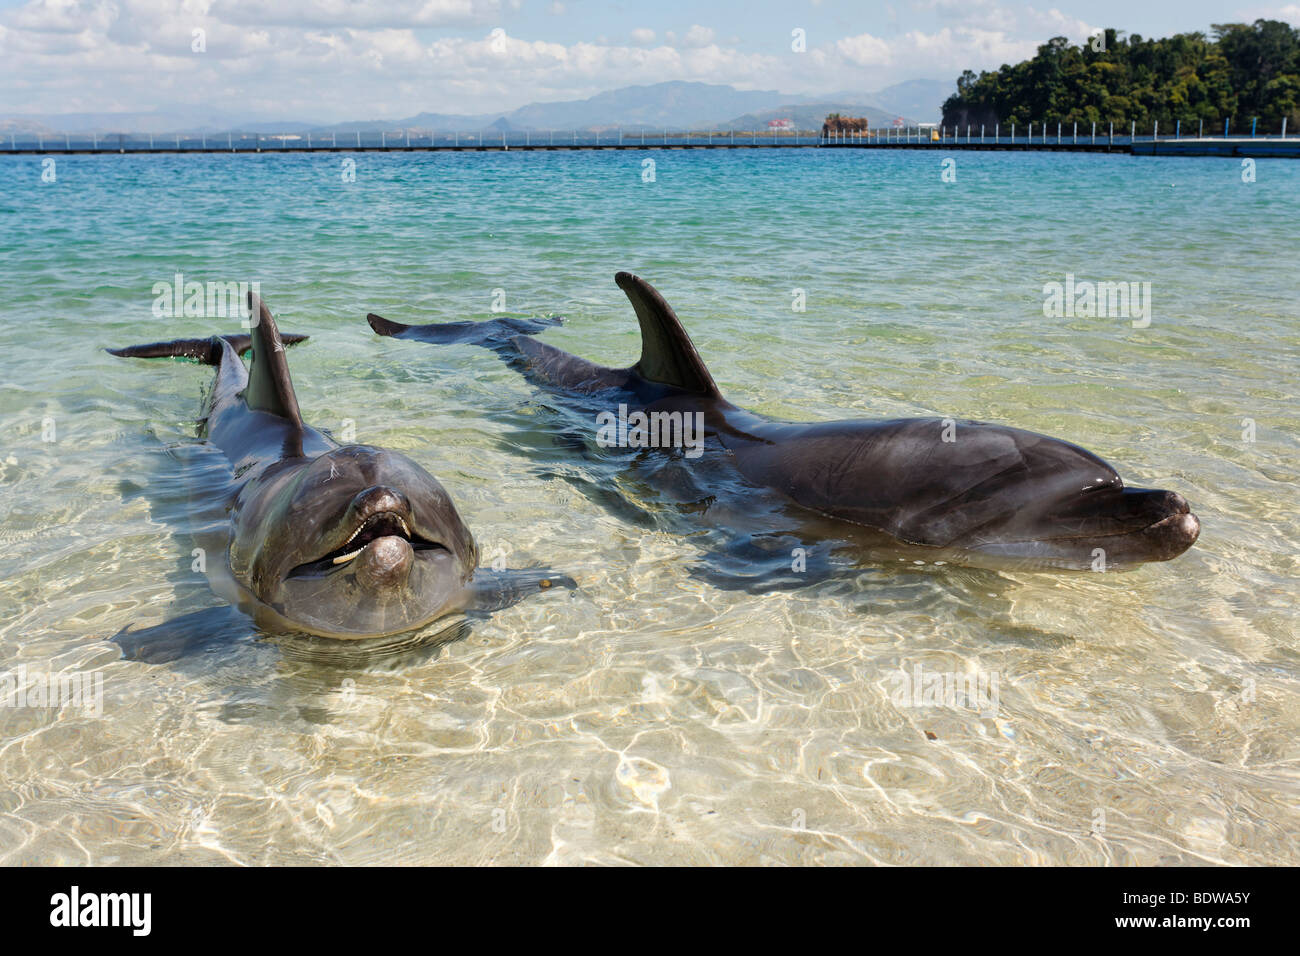 Two Bottlenose Dolphins (Tursiops truncatus), shallow water, Ocean Adventure, Subic Bay, Luzon, Philippines, South China Sea, P Stock Photo